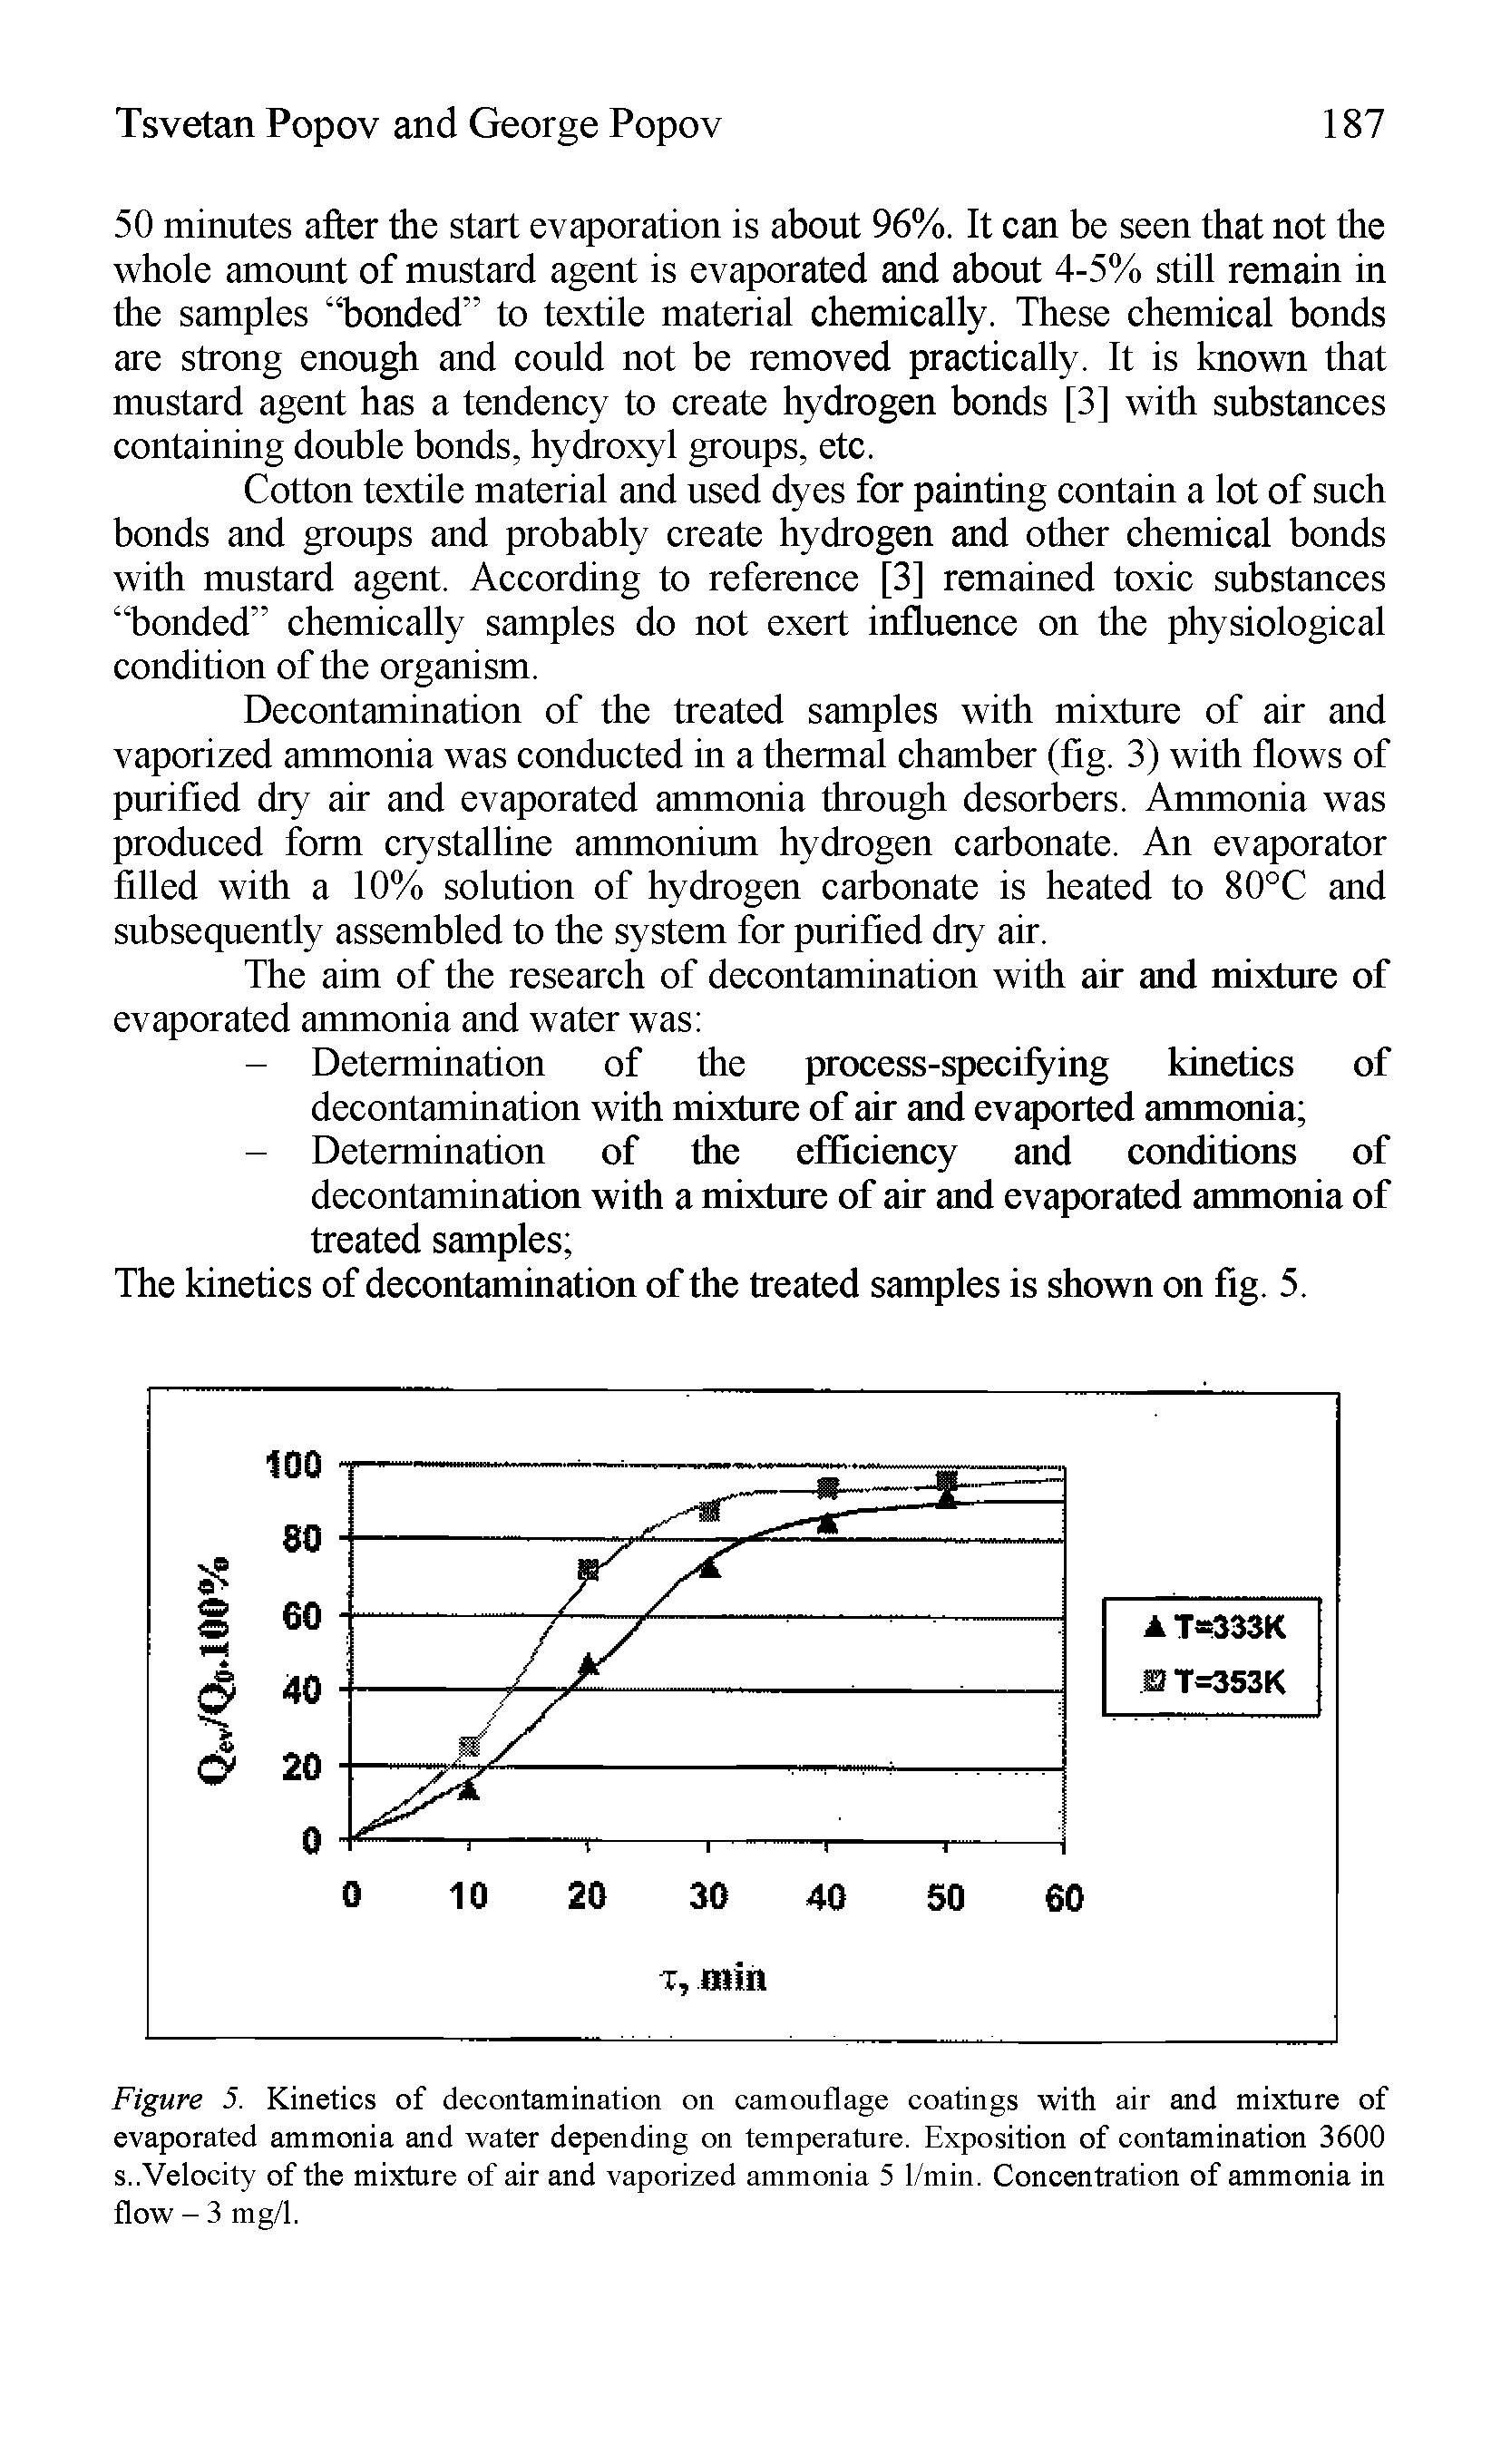 Figure 5. Kinetics of decontamination on camouflage coatings with air and mixture of evaporated ammonia and water depending on temperature. Exposition of contamination 3600 s..Velocity of the mixture of air and vaporized ammonia 5 l/min. Concentration of ammonia in flow - 3 mg/1.